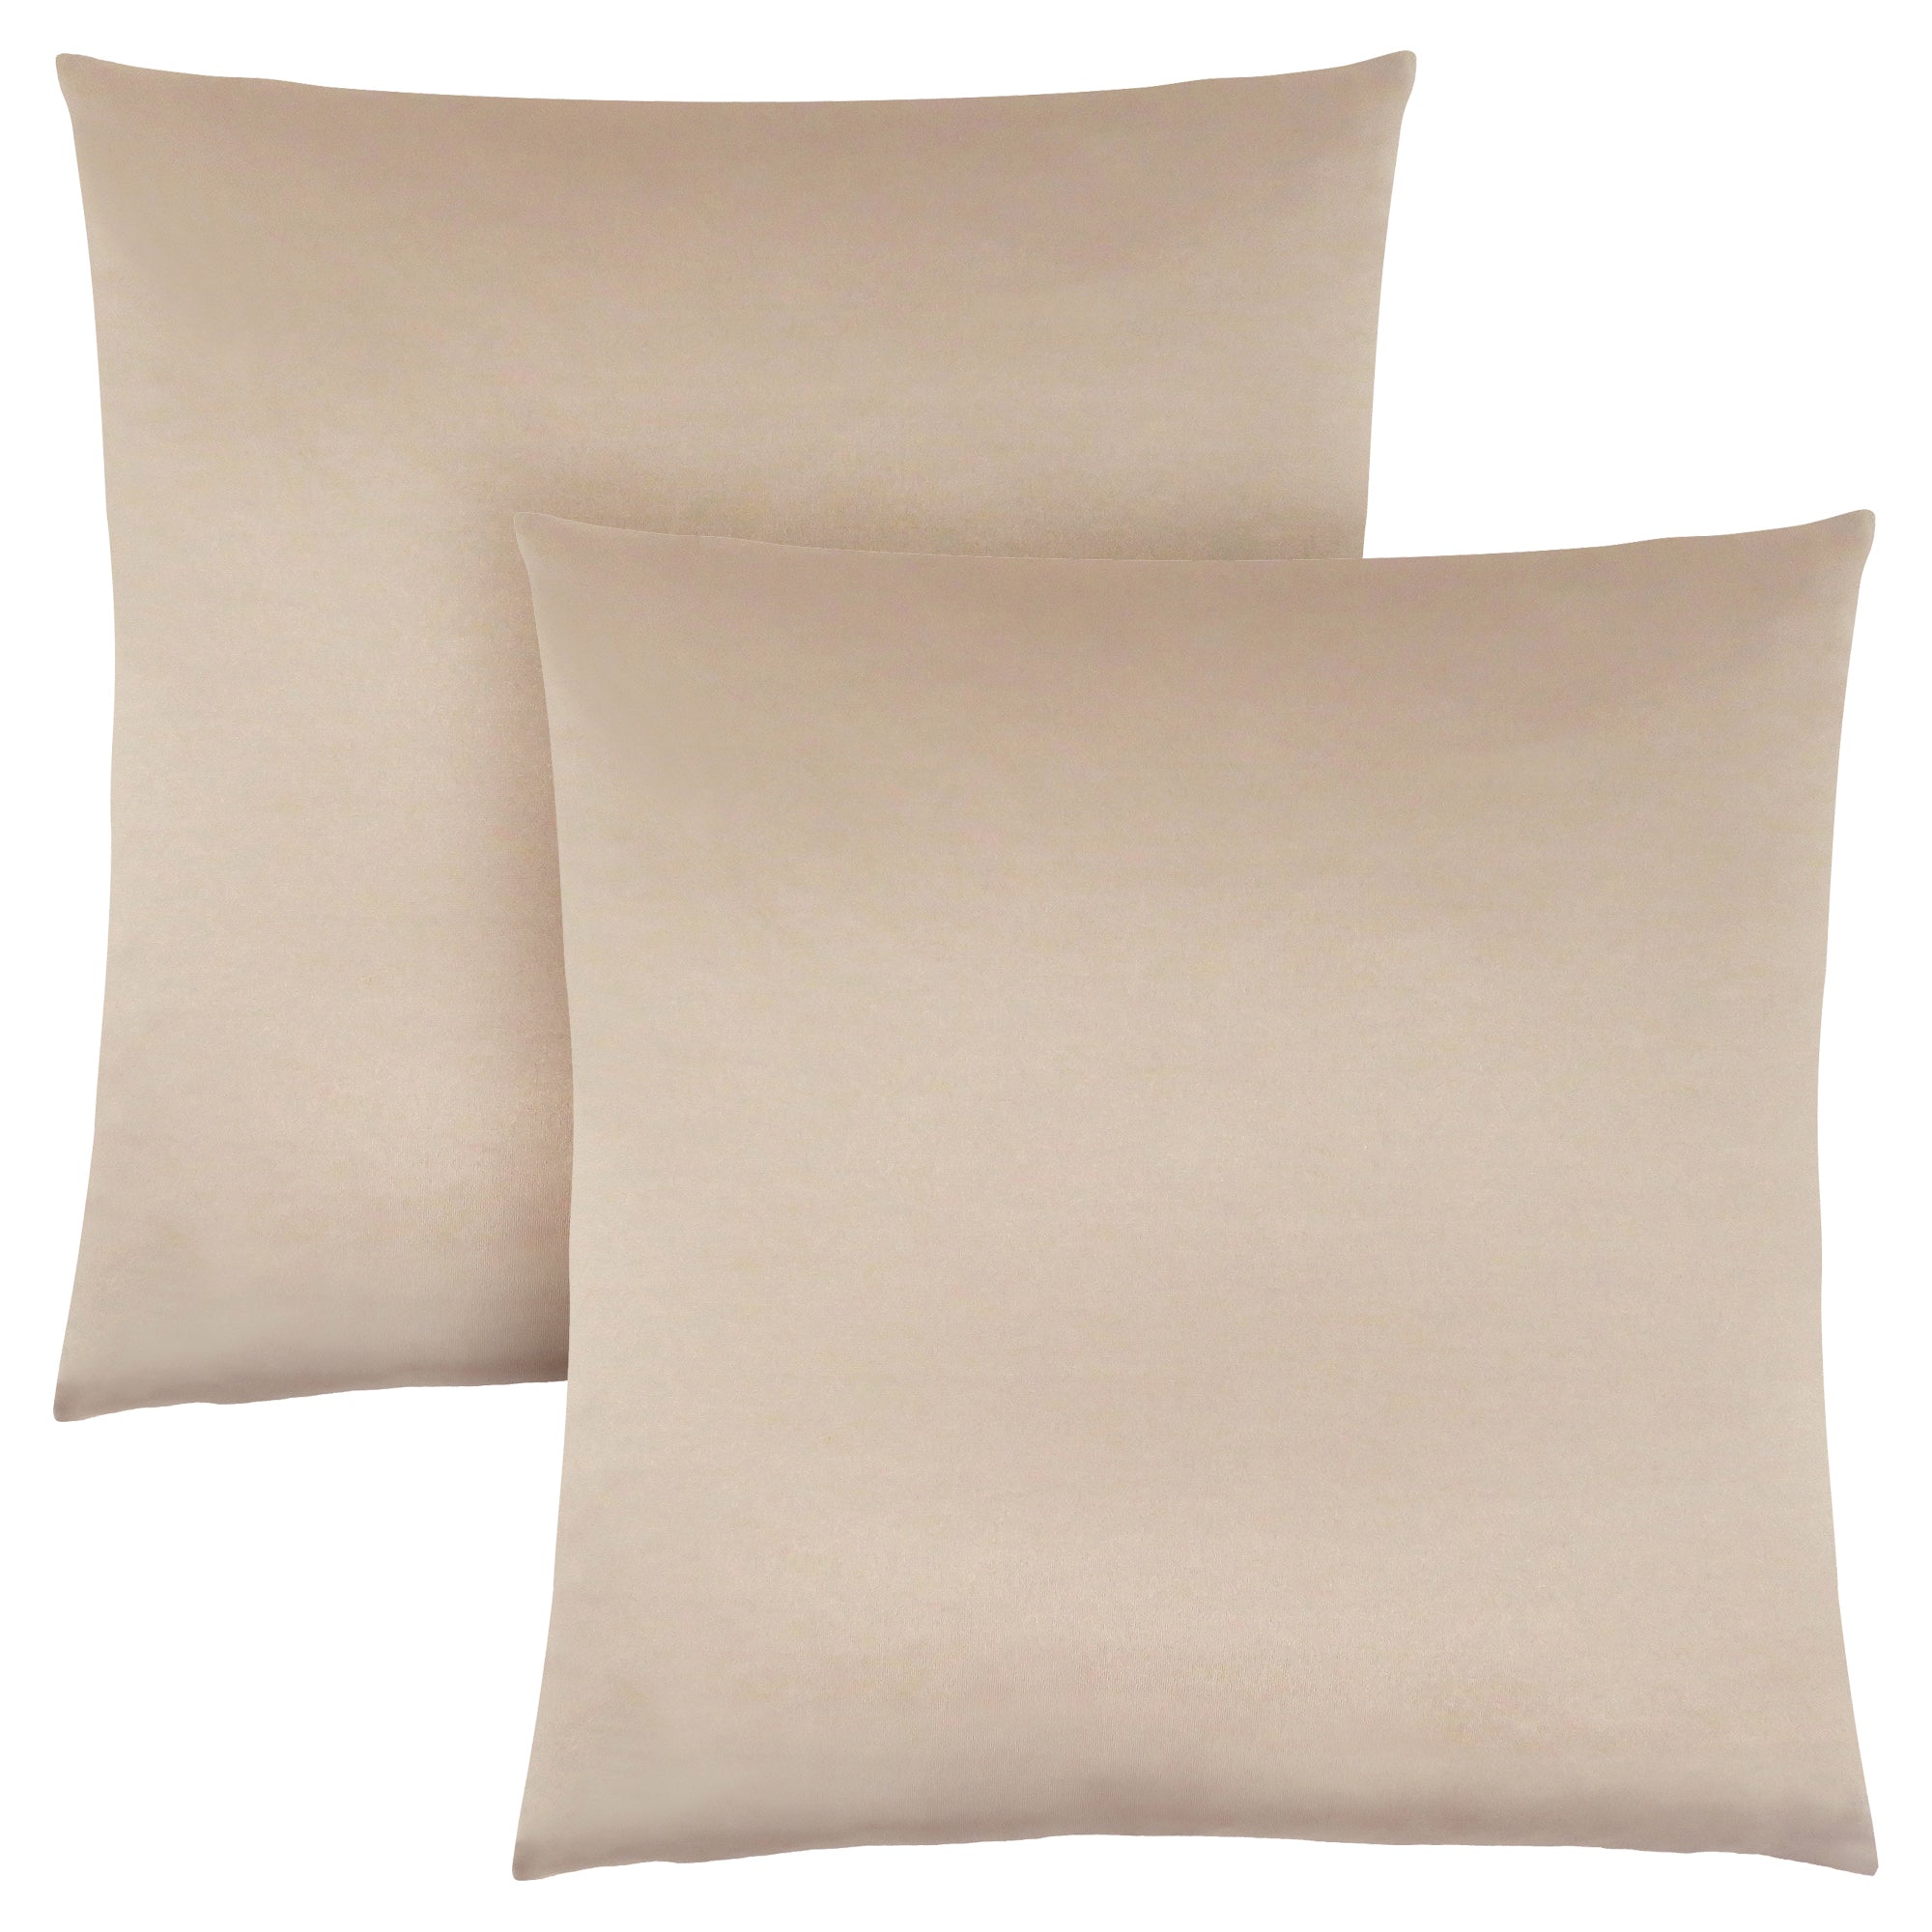 MN-949335    Pillows, Set Of 2, 18 X 18 Square, Insert Included, Decorative Throw, Accent, Sofa, Couch, Bed, Satin-Look Polyester Fabric, Hypoallergenic Soft Polyester Insert, Gold, Glam